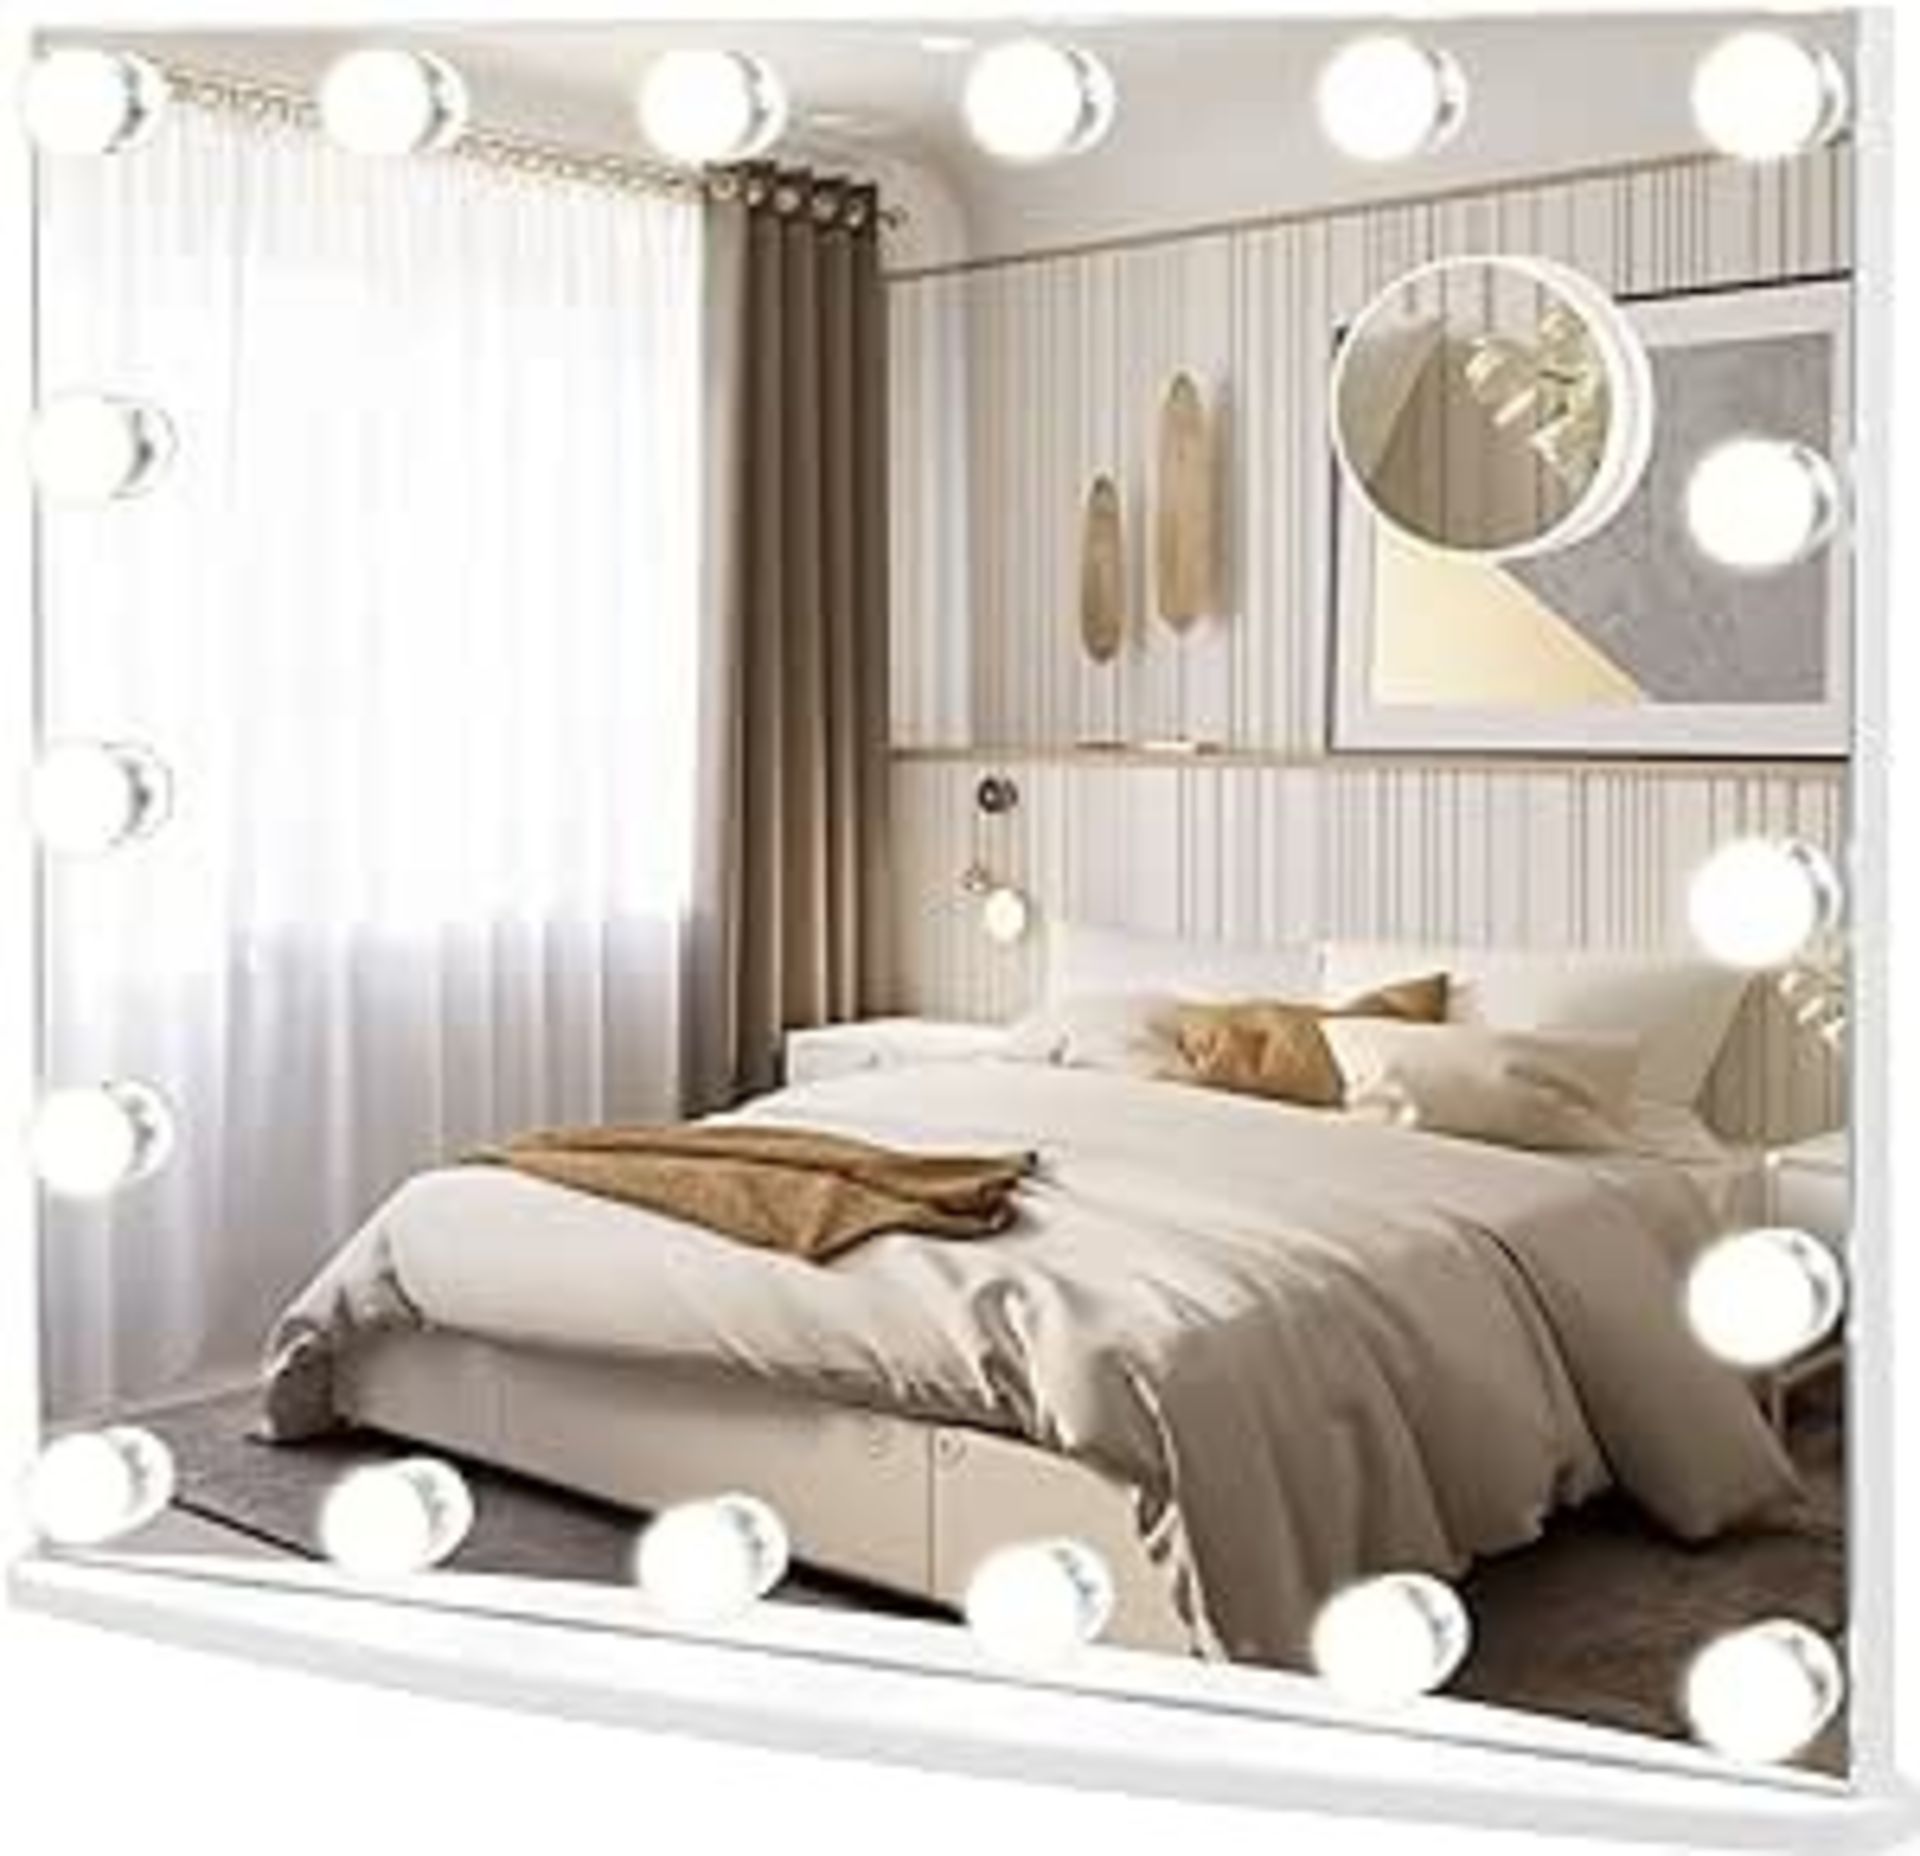 Hollywood Vanity Mirror, Tabletop/Wall Mounted Makeup Mirror with 18 Dimmable LED Bulbs - ER53